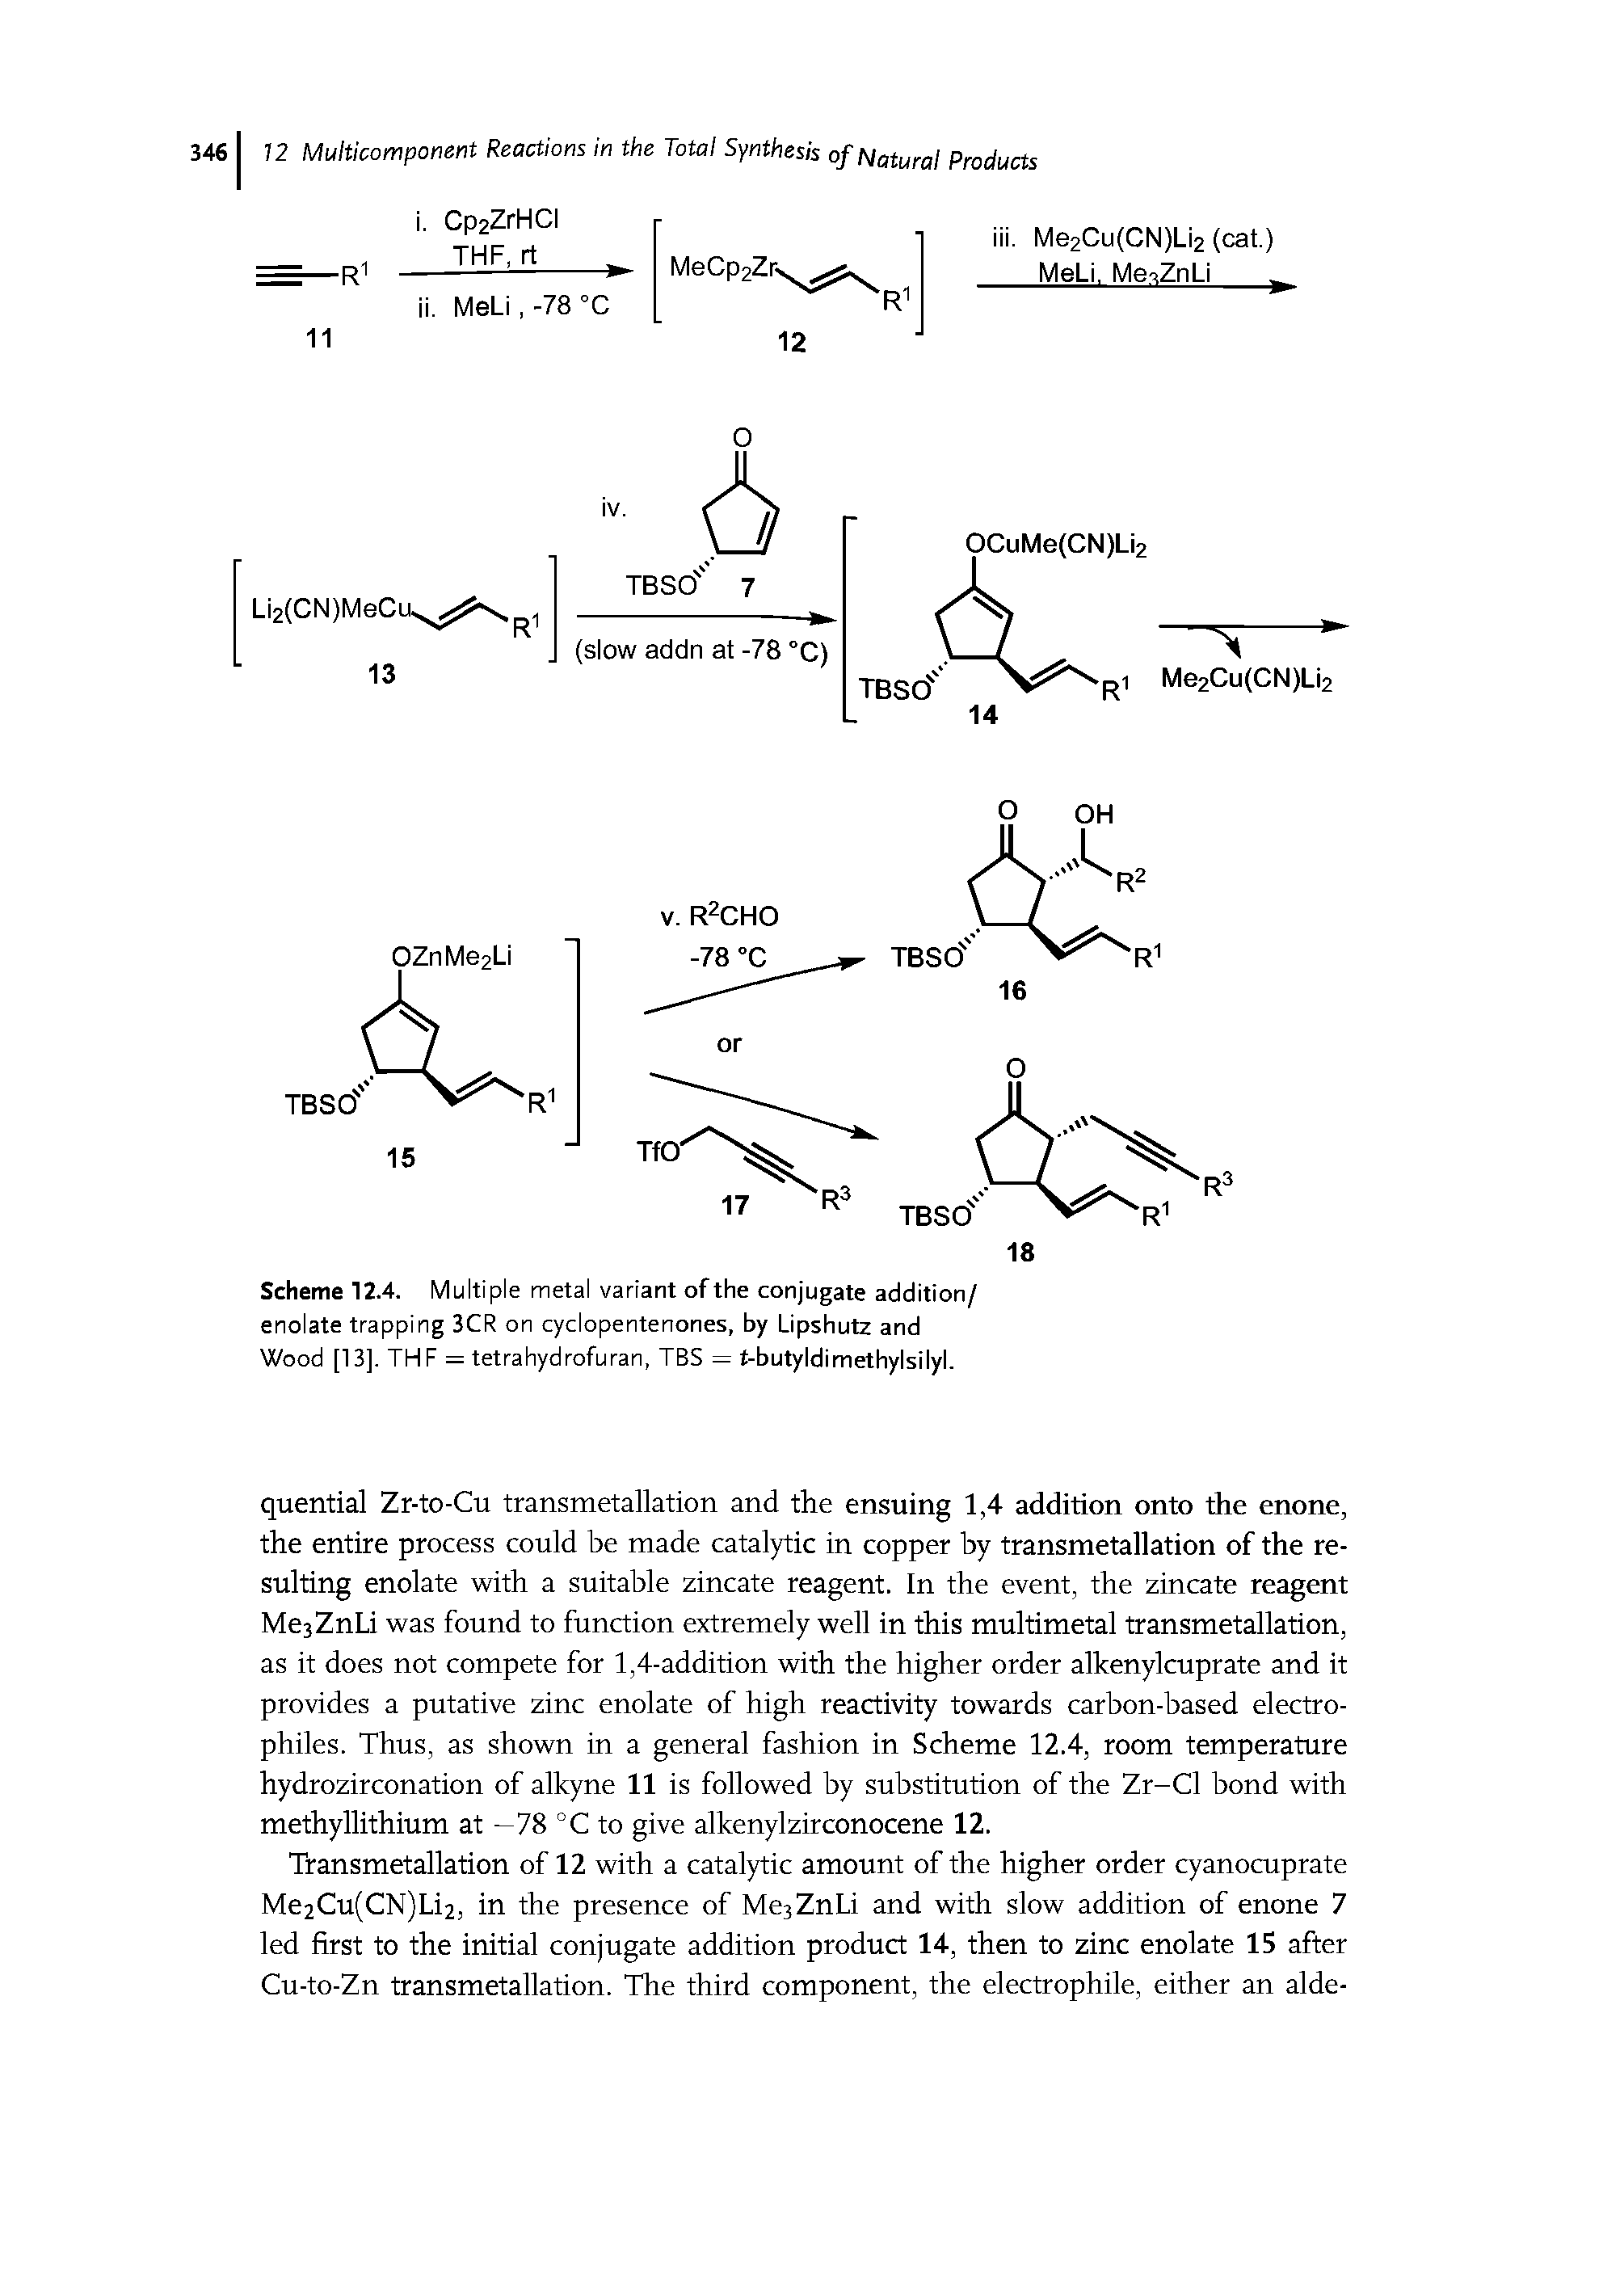 Scheme 12.4. Multiple metal variant of the conjugate addition/ enolate trapping 3CR on cyclopentenones, by Lipshutz and Wood [13]. THF = tetrahydrofuran, TBS = t-butyldimethylsilyl.